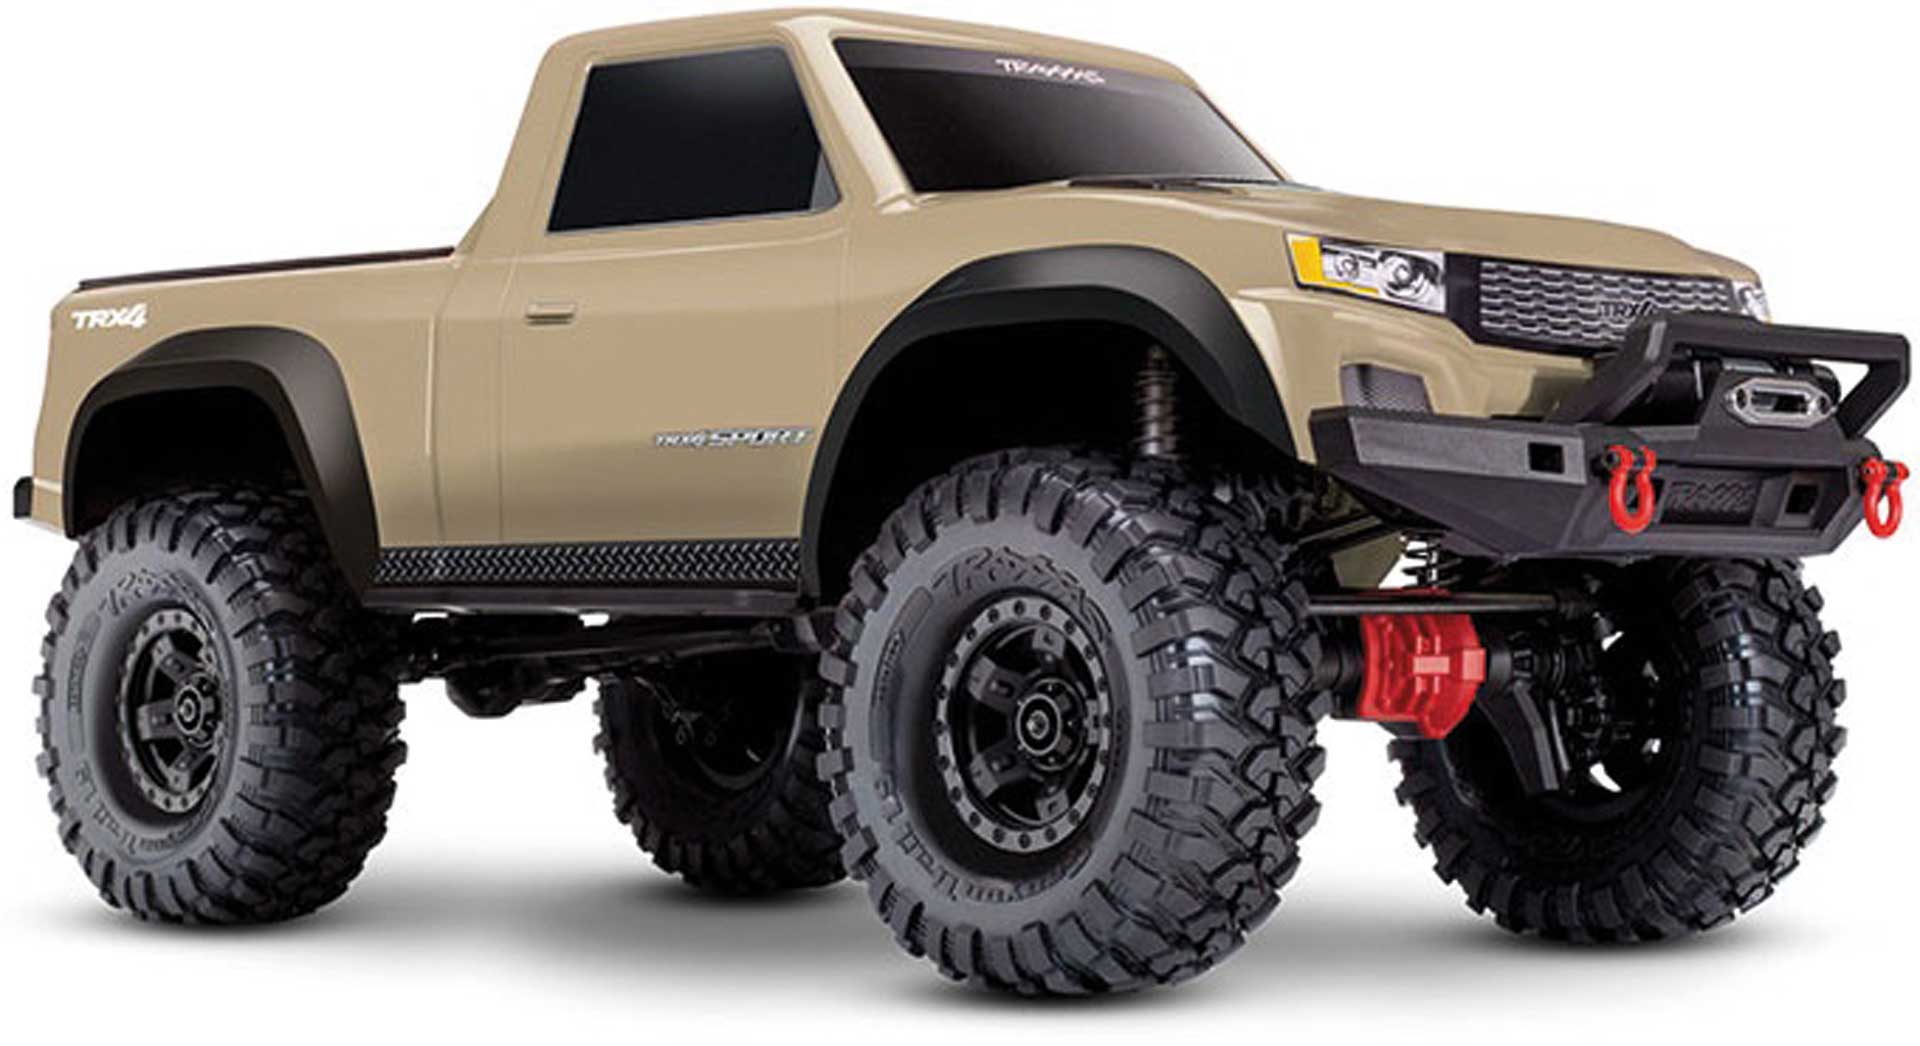 TRAXXAS TRX-4 SPORT 4X4 TAN 1/10 SCALE-CRAWLER RTR BRUSHED, CLIPLESS, SANS BATTERIE NI CHARGEUR